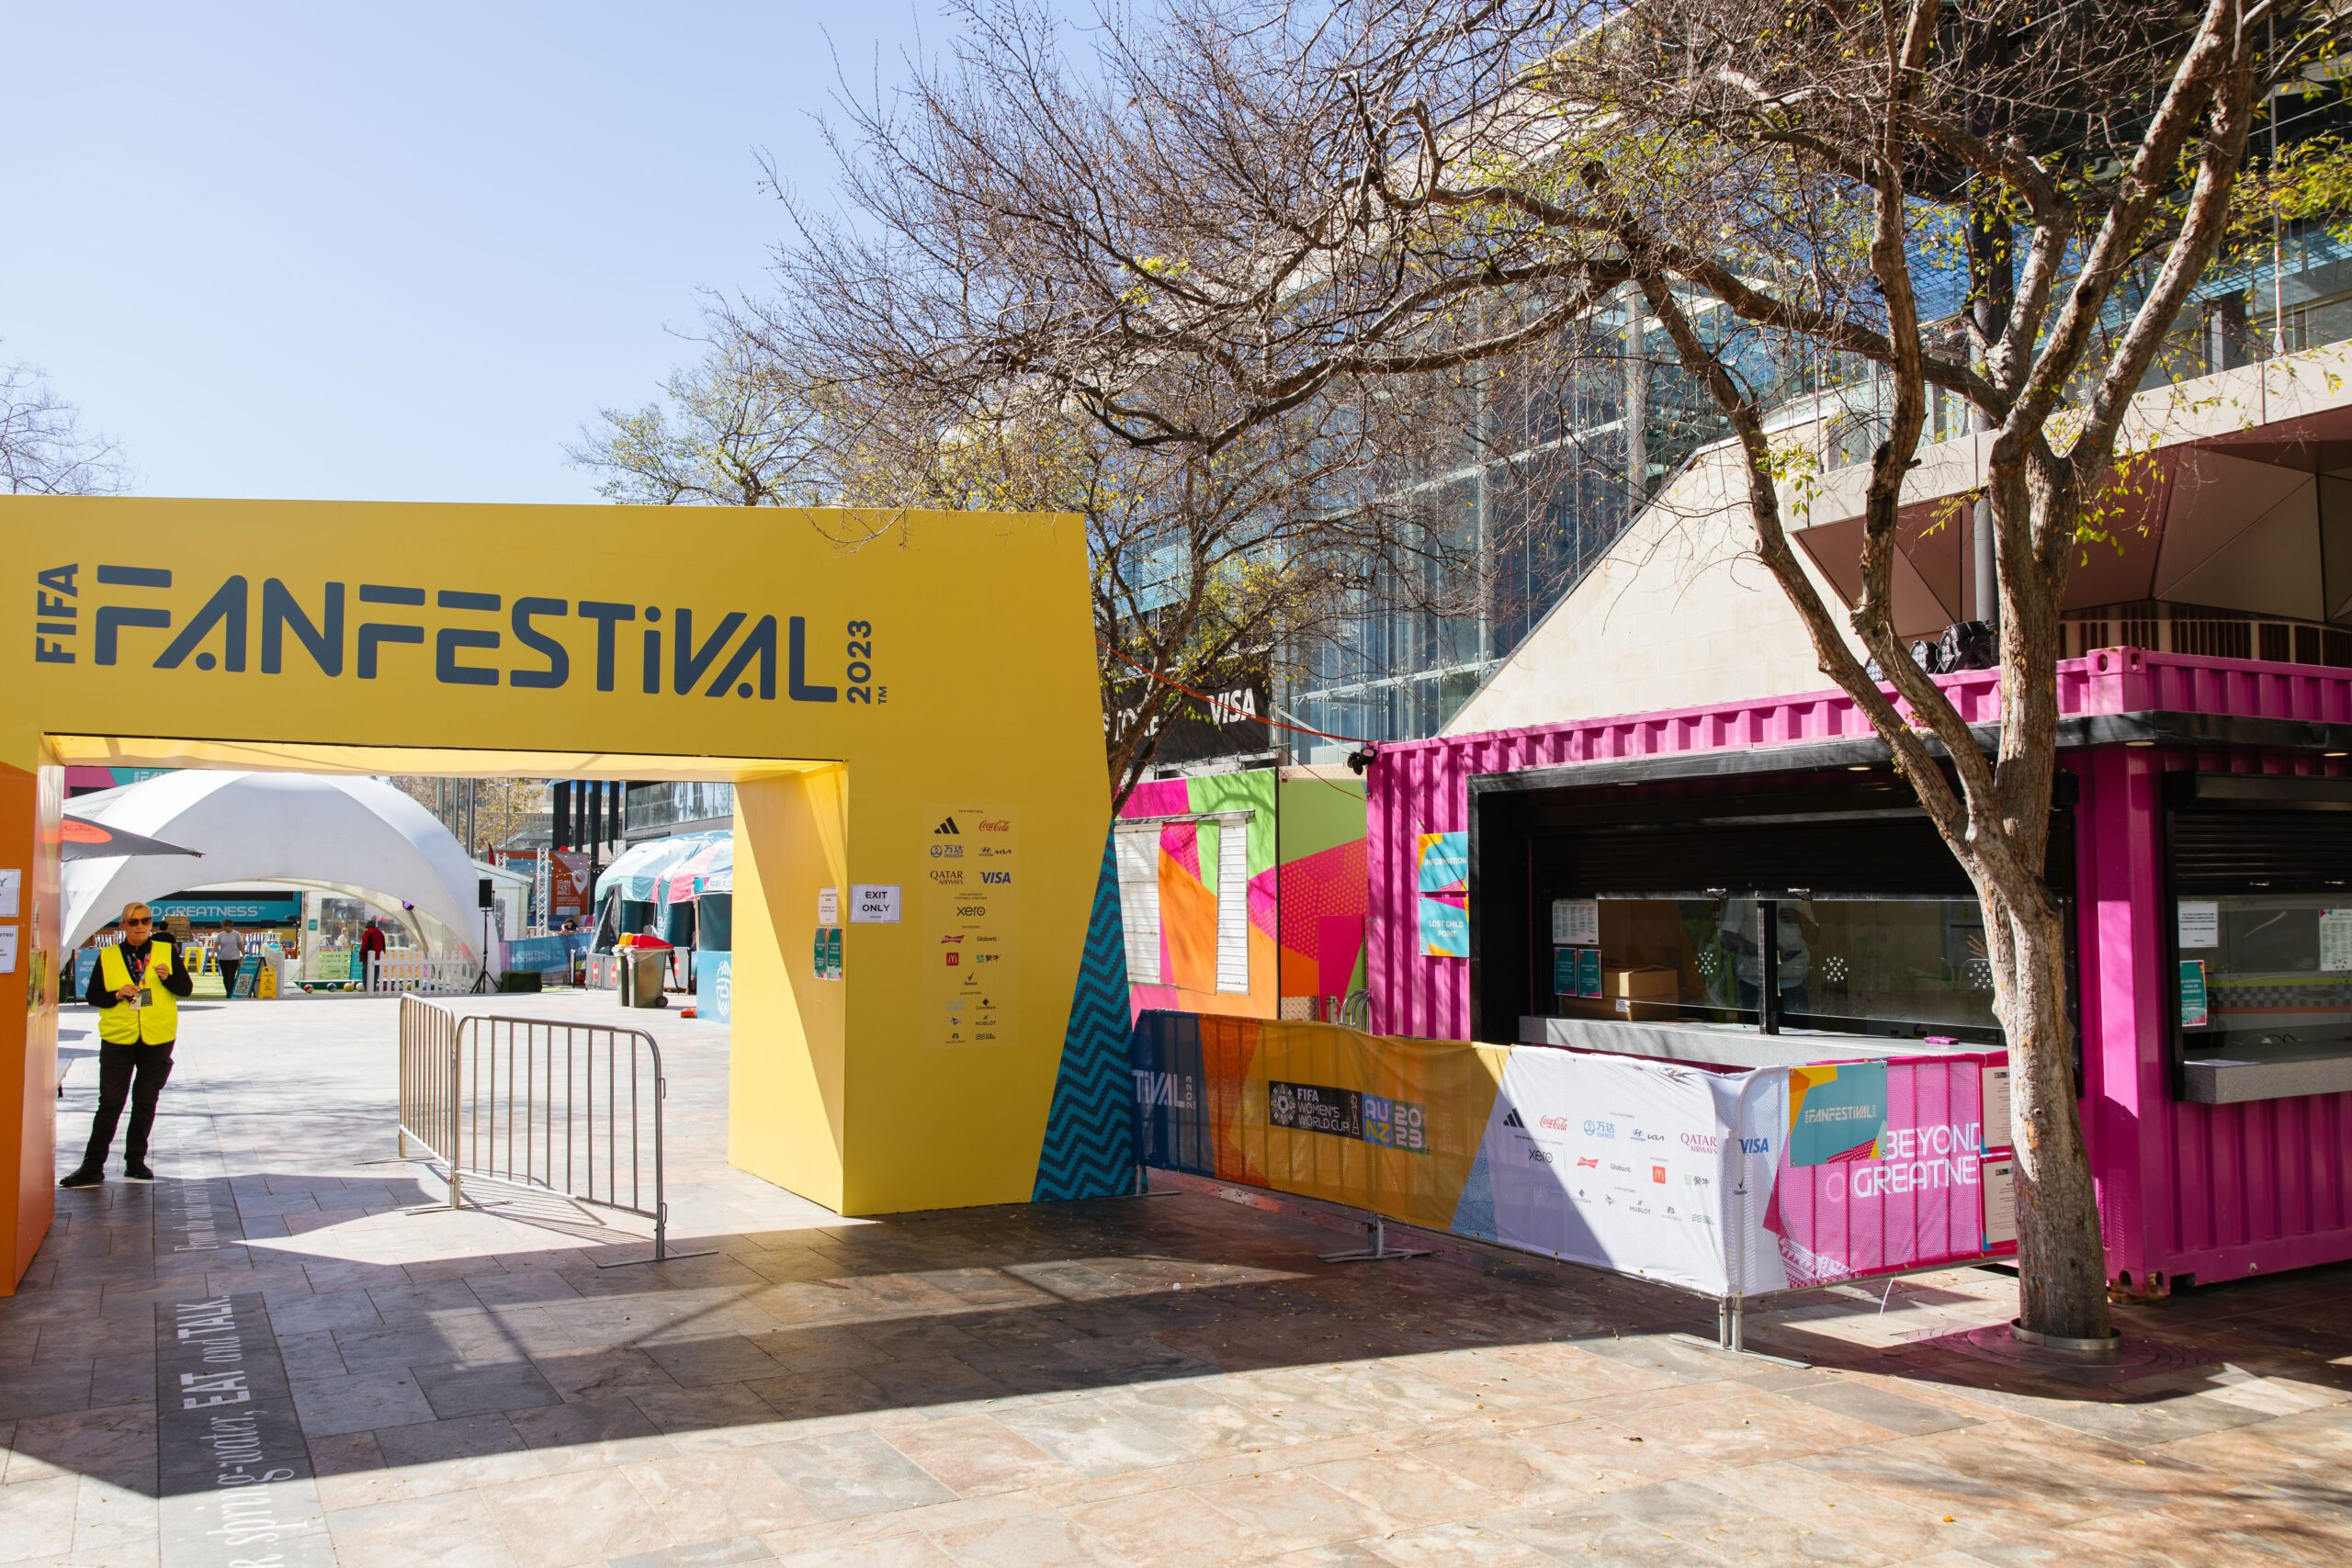 Entrance to the FIFA Fan Festival 2023 with colorful booths and trees in the background.